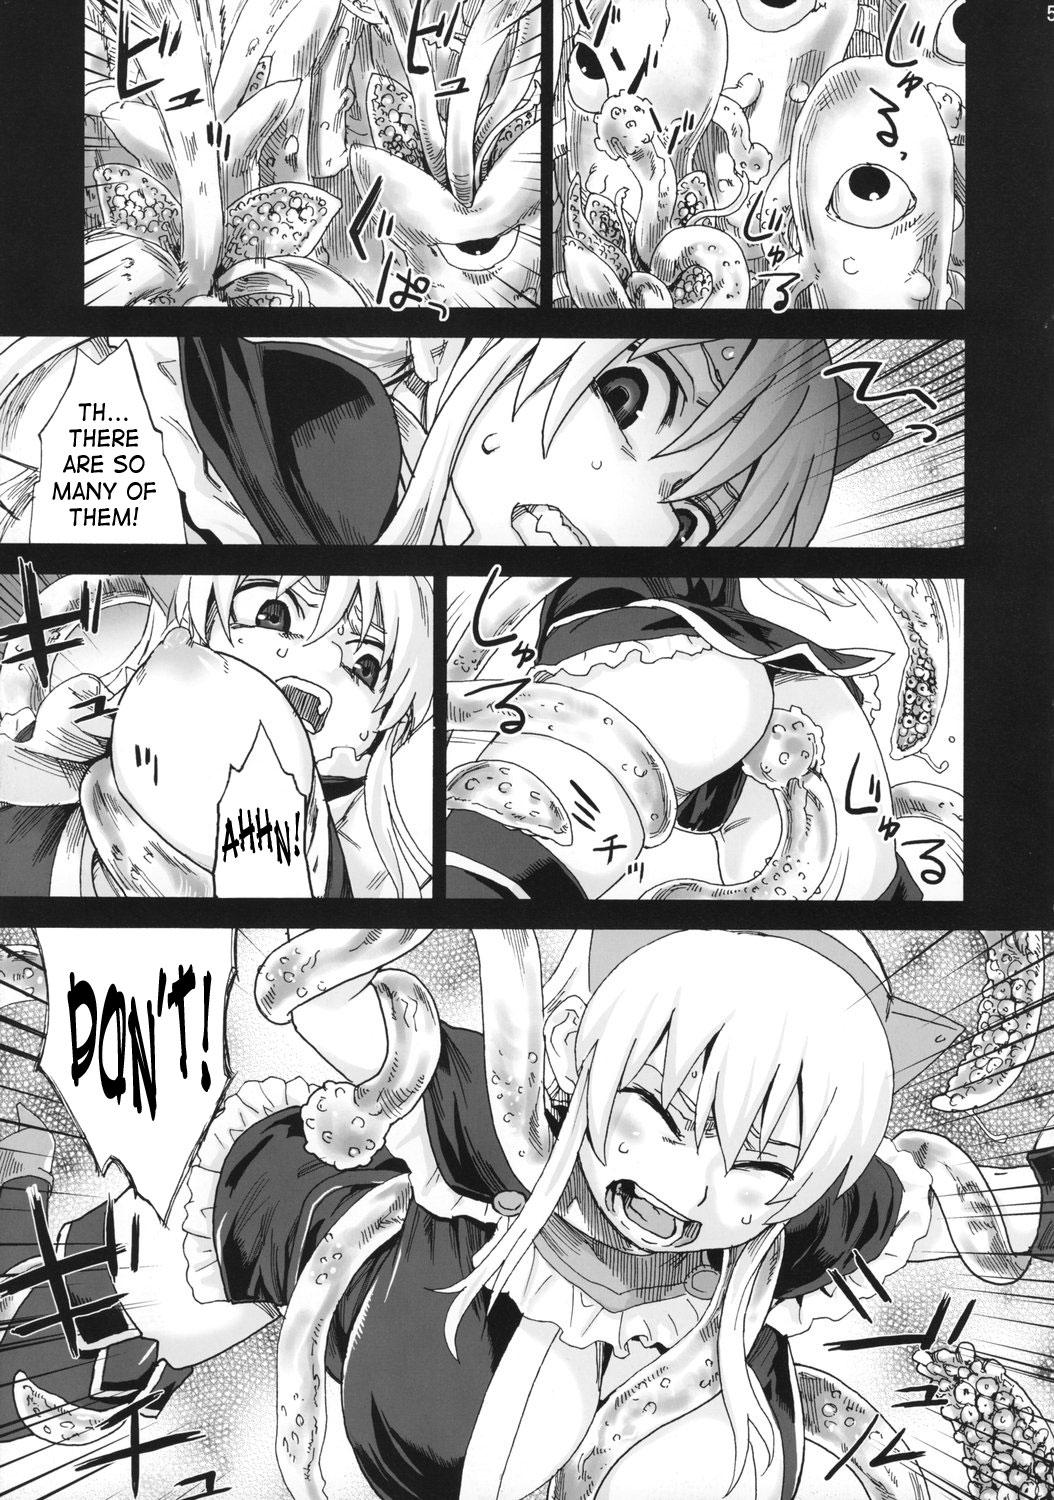 Horny Sluts Victim Girls 5 - She zaps to... - Tower of druaga Doggy Style Porn - Page 4